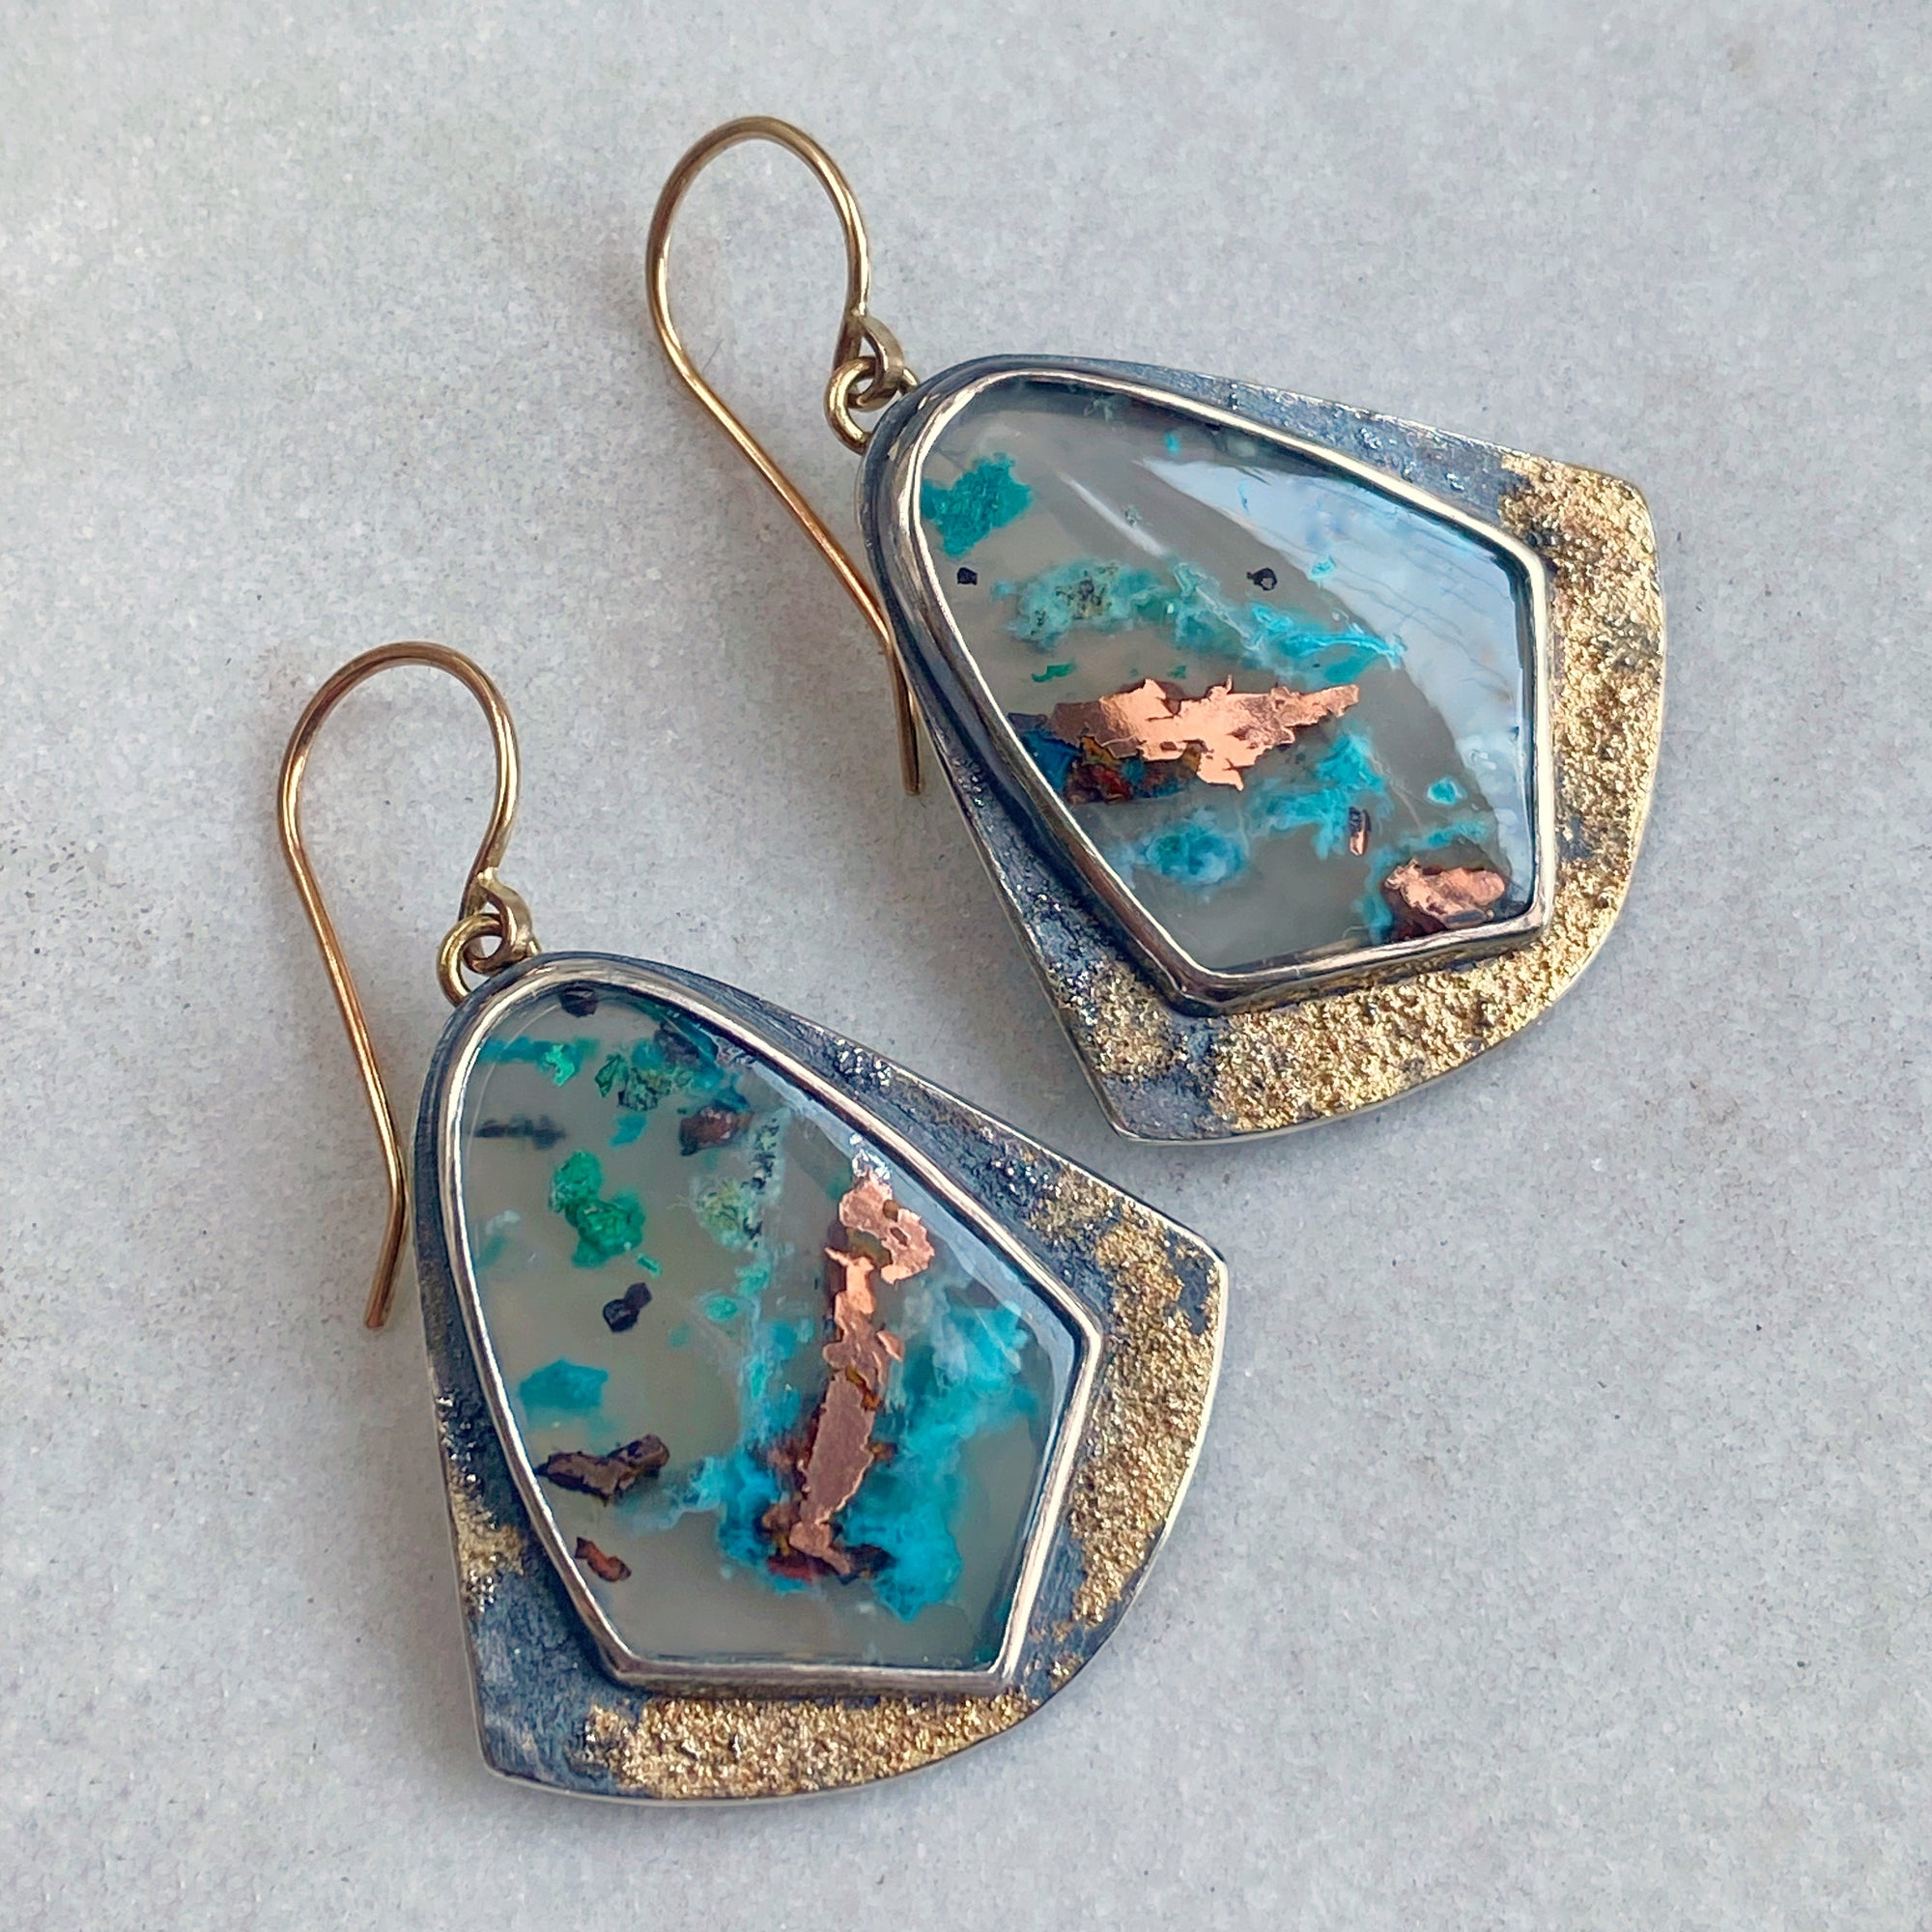 Native Copper and Chrysocolla in Quartz Earrings